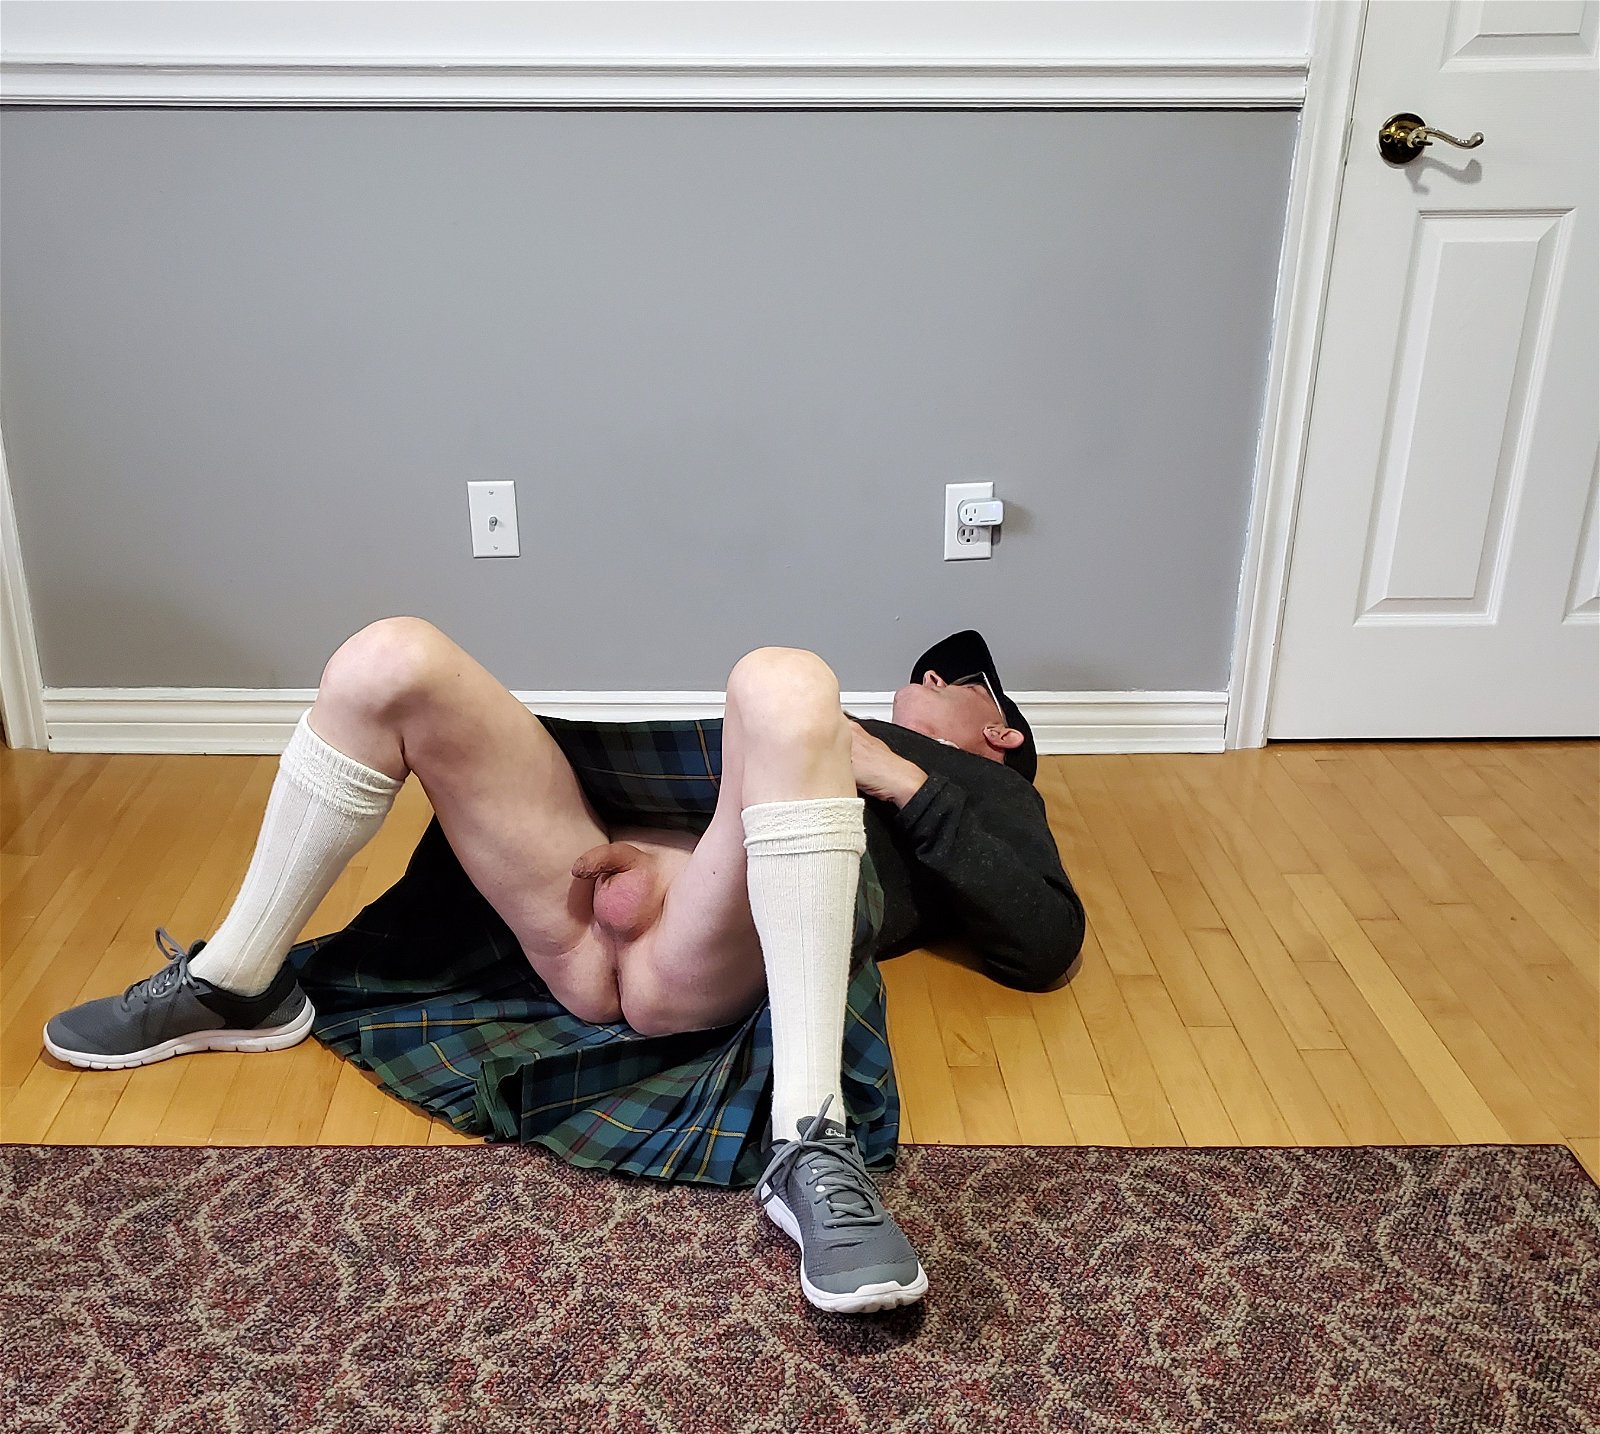 Watch the Photo by AnneCD1973 with the username @AnneCD1973, who is a verified user, posted on October 26, 2019. The post is about the topic Gay Porn. and the text says 'Up my kilt'